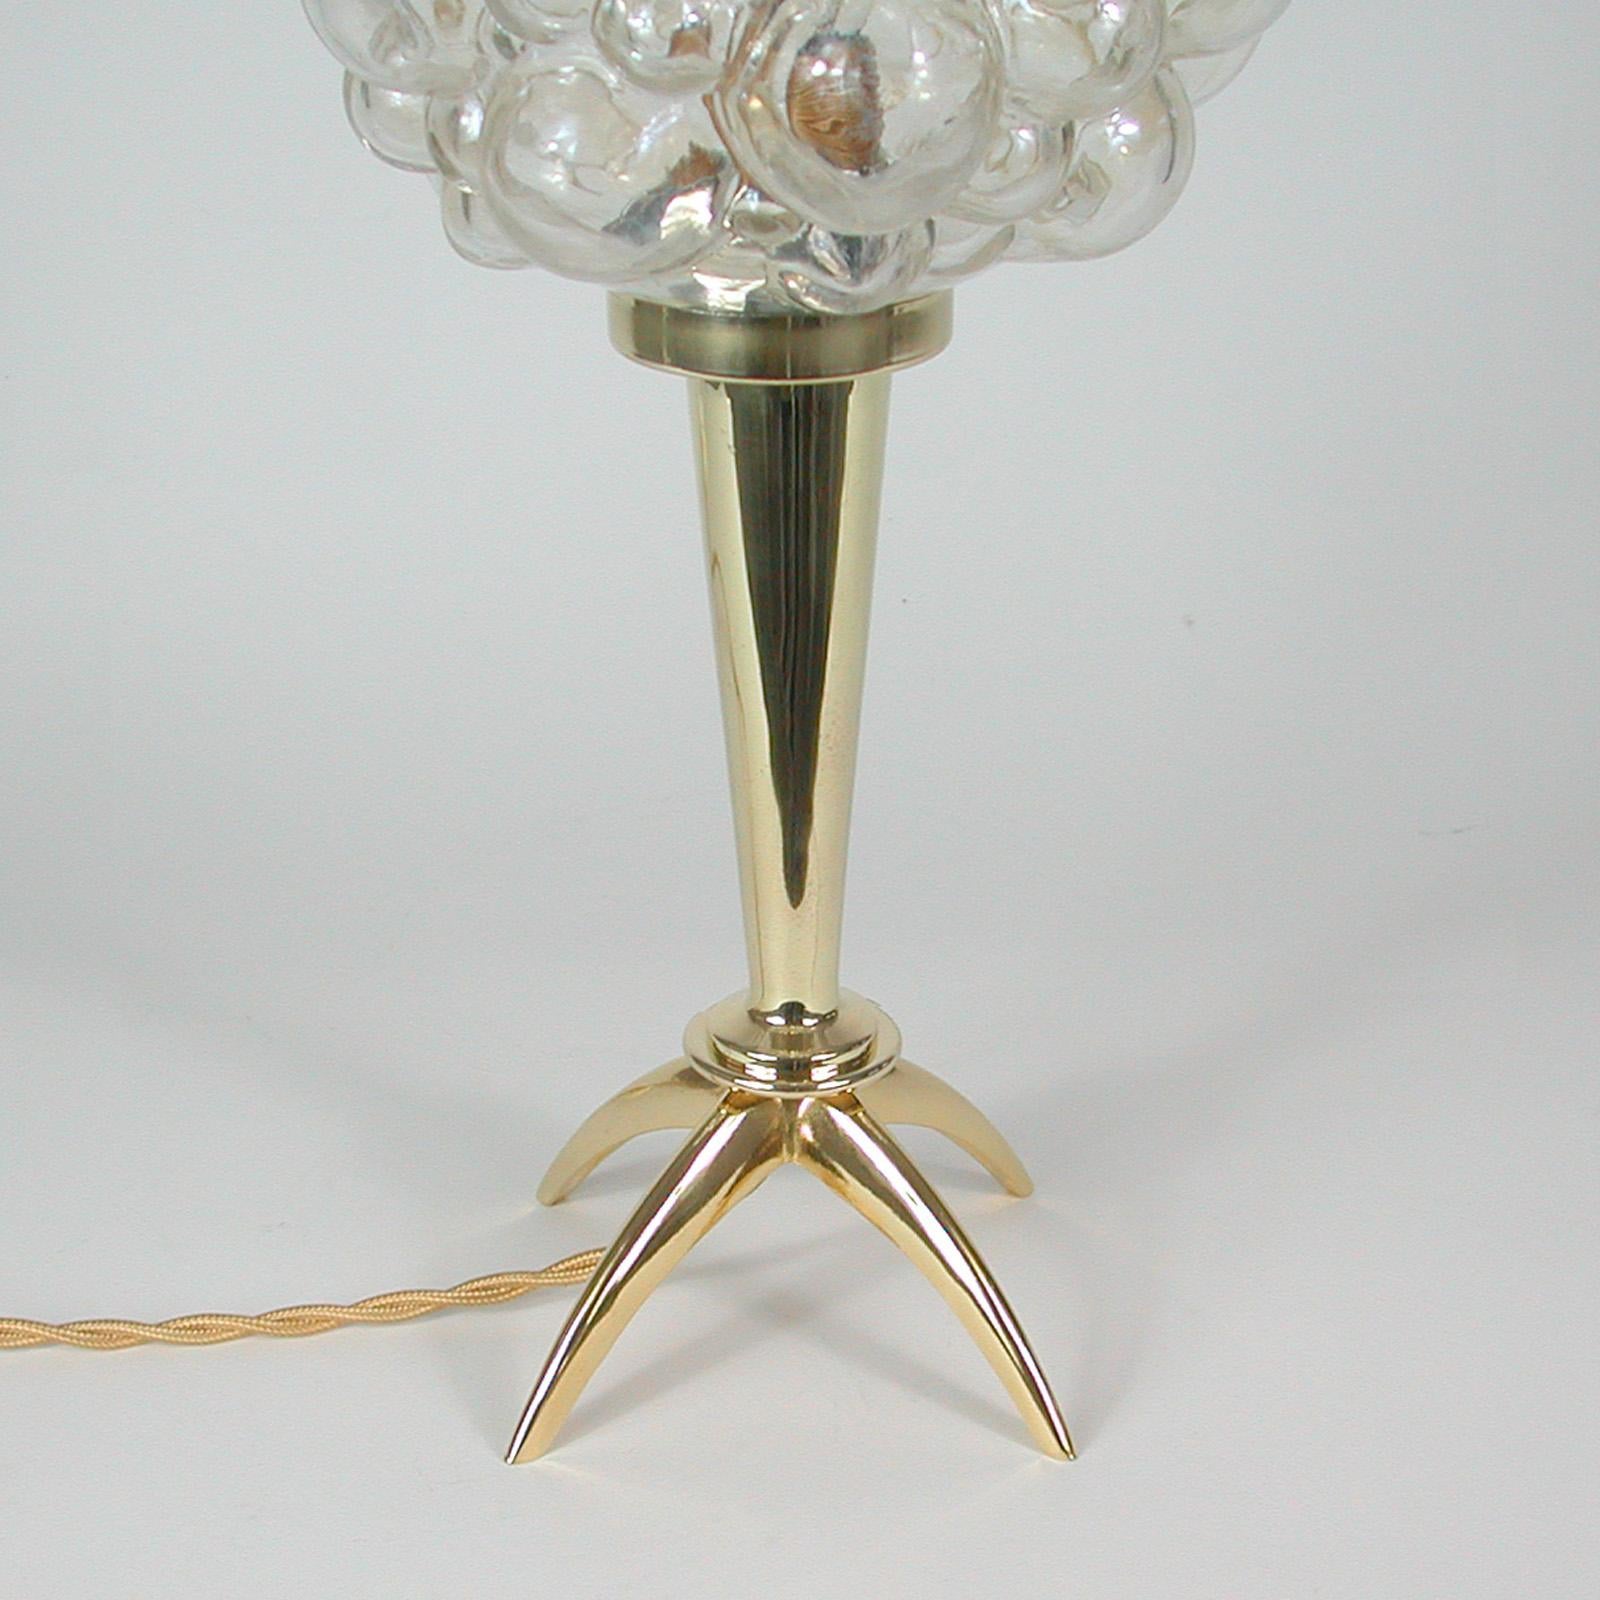 Midcentury Bubble Glass and Brass Table Lamp by Helena Tynell for Limburg, 1960s For Sale 1